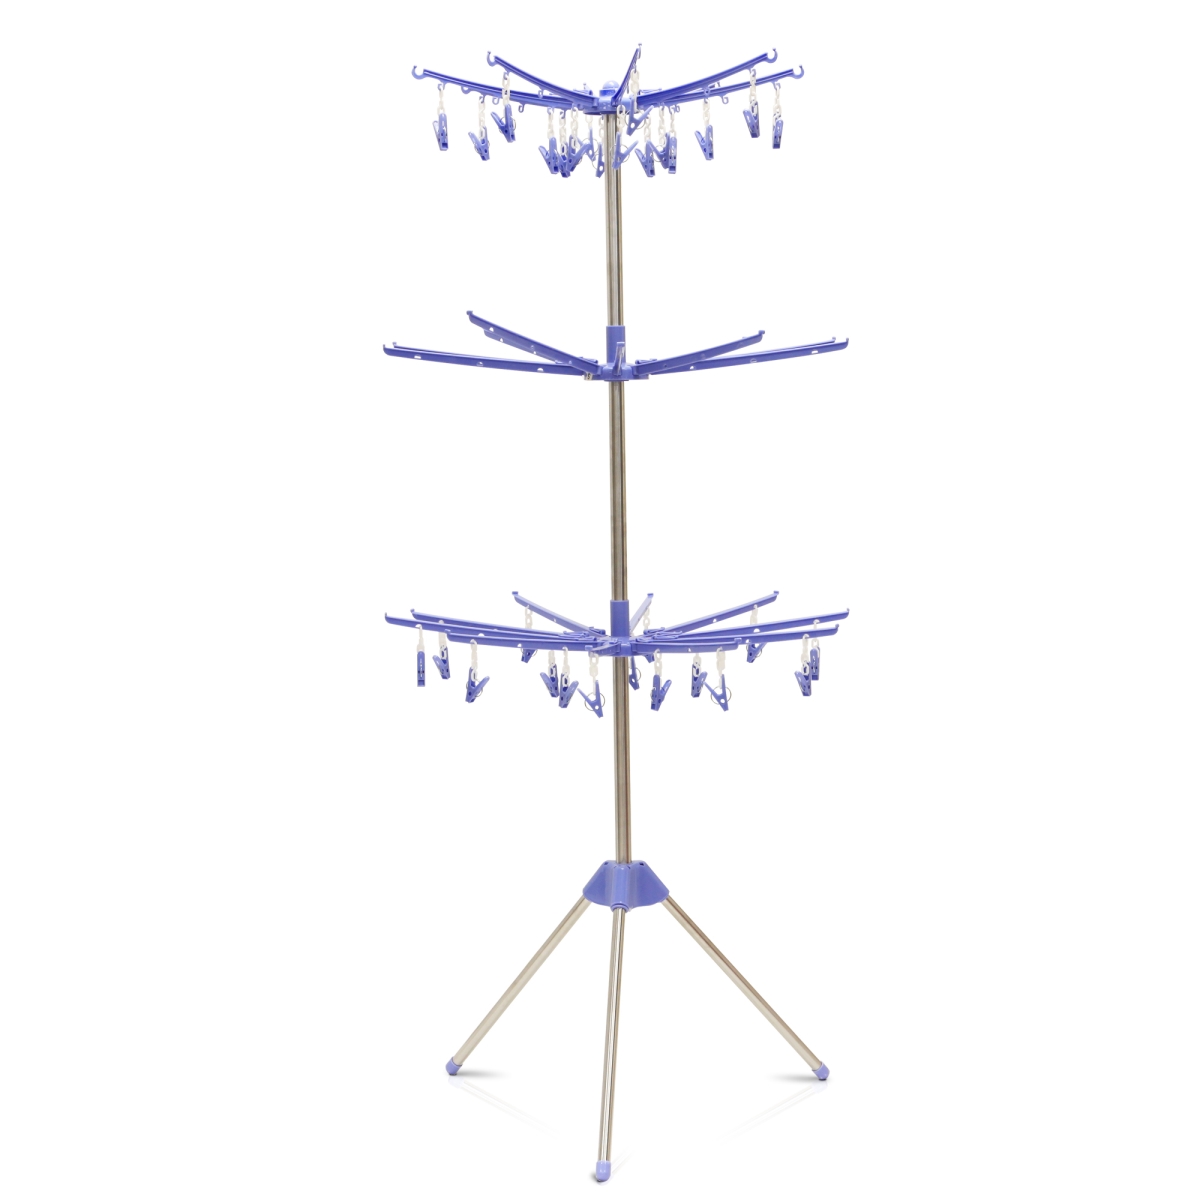 Yijin Clothes Drying Stand, Blue